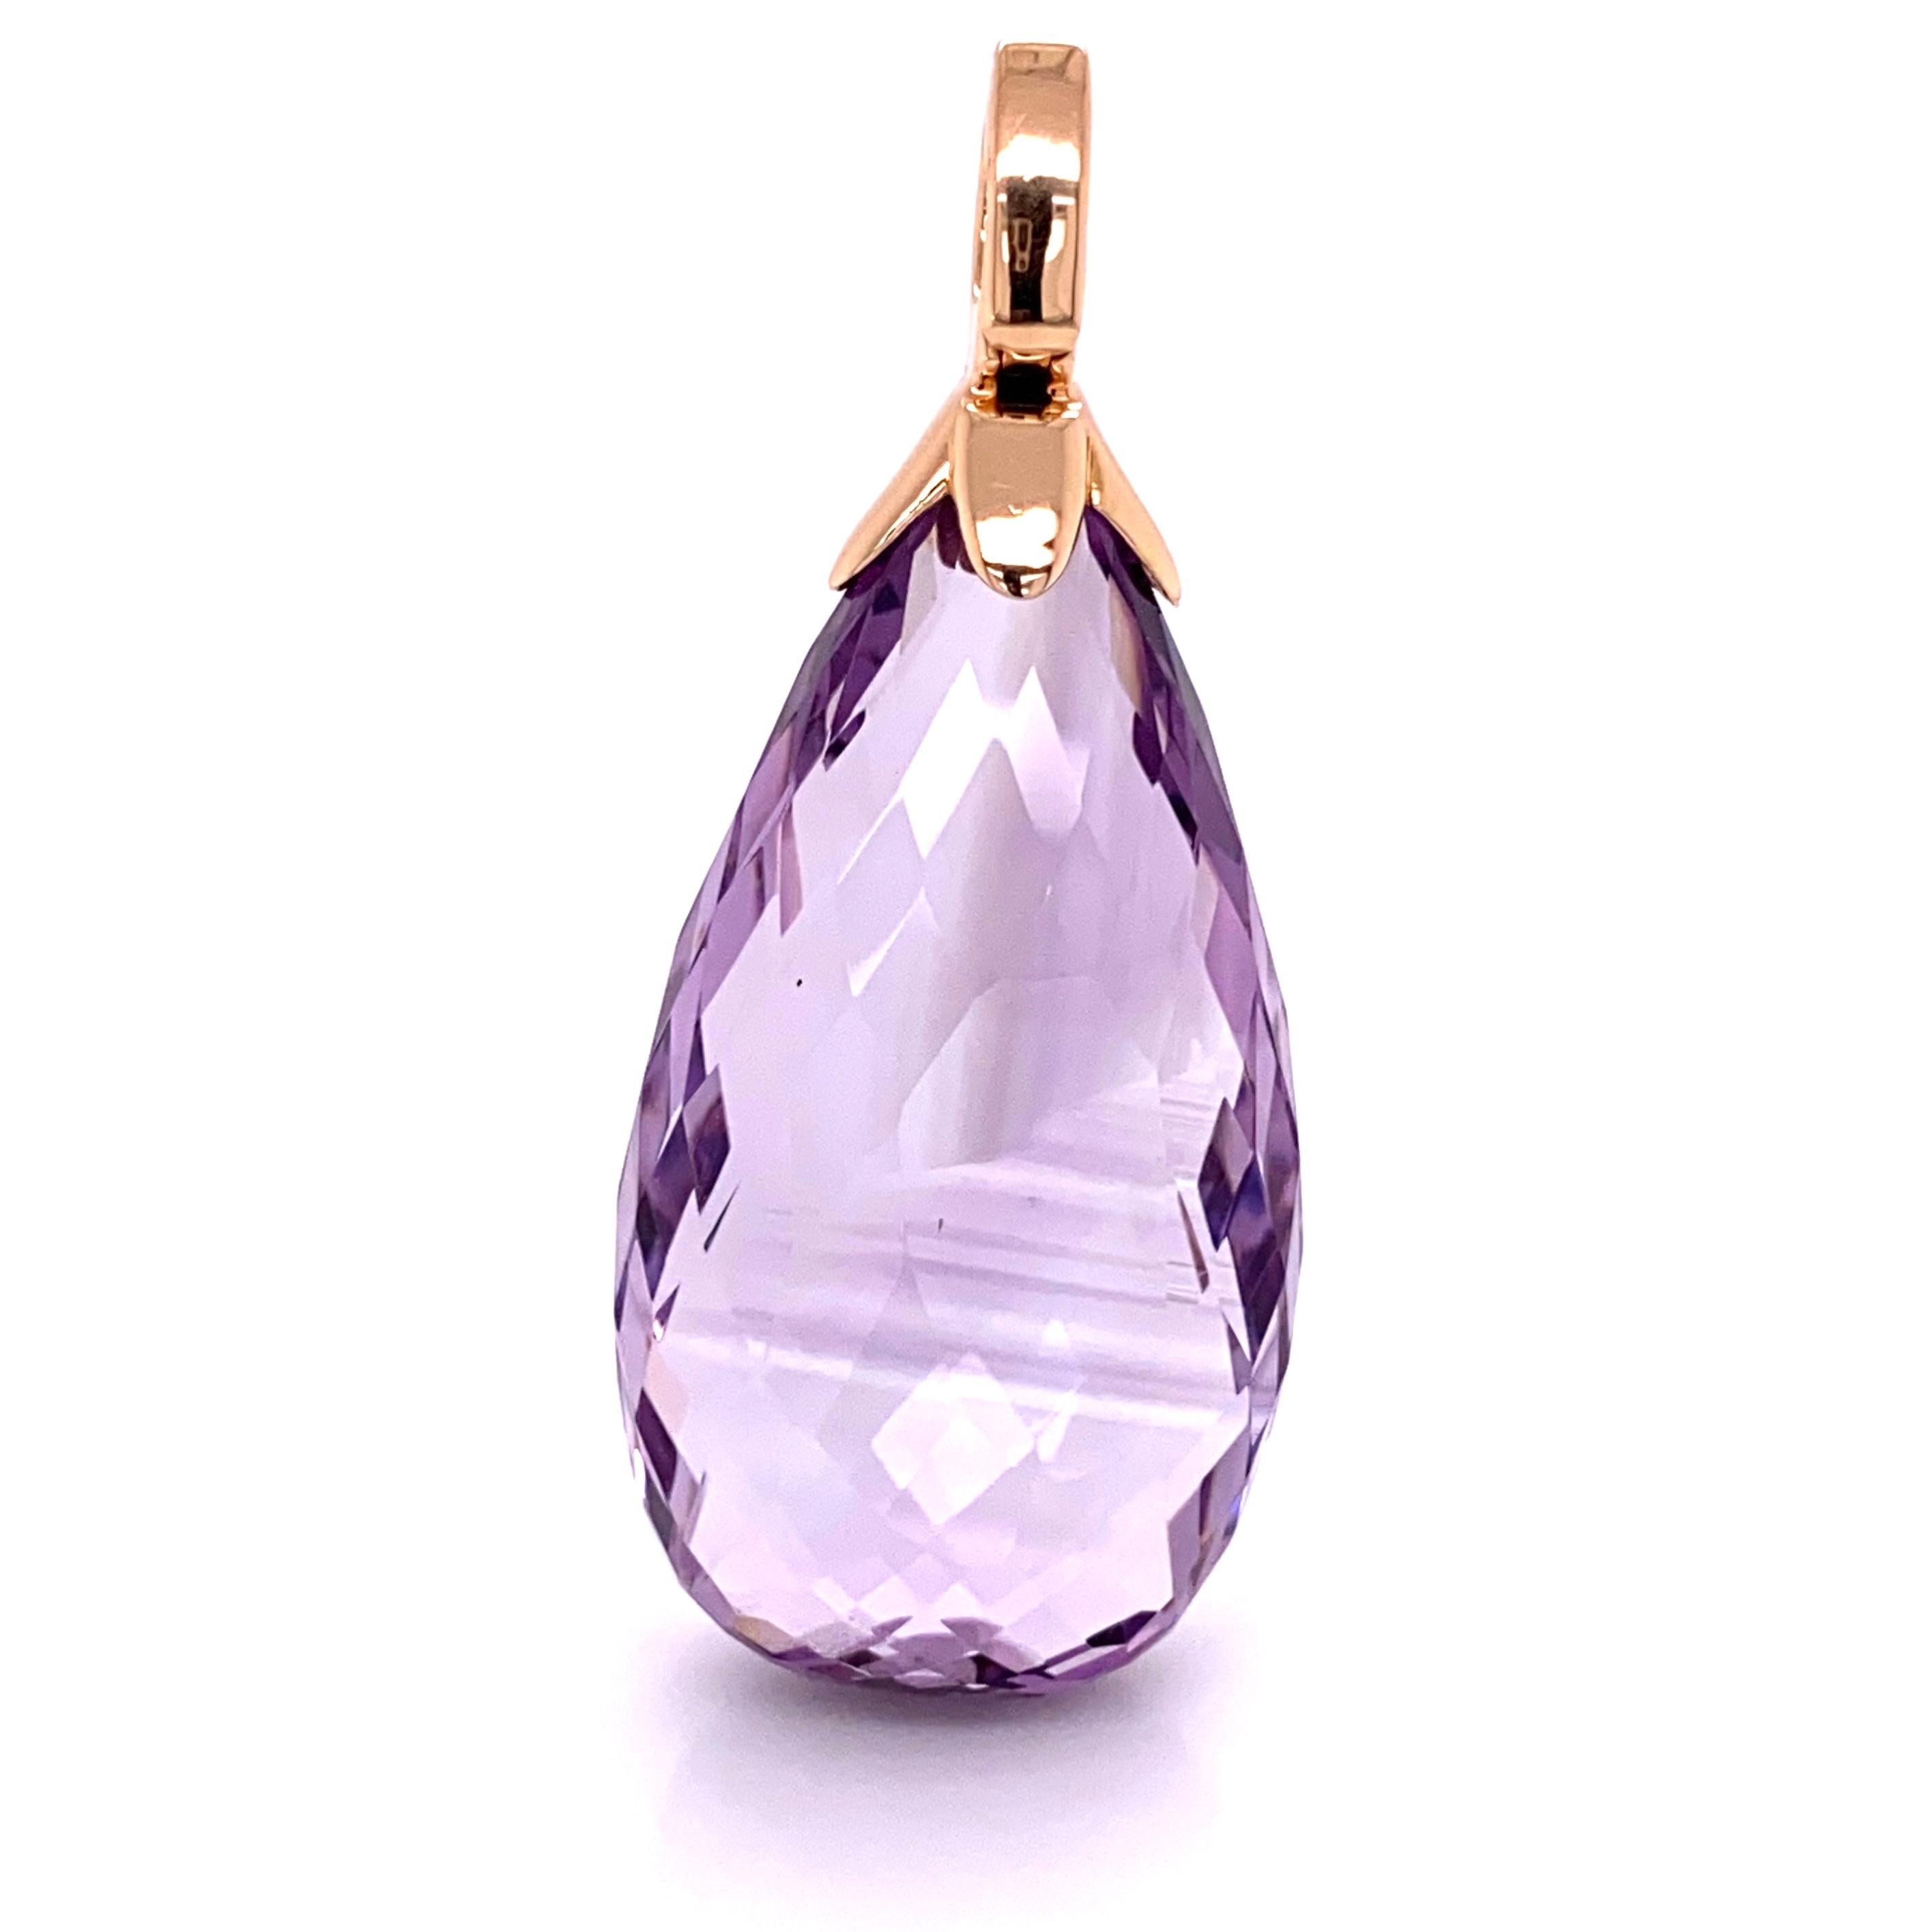 90 Carat Briolette Amethyst and Champagne Diamond Rose Gold Pendant Necklace In Excellent Condition For Sale In Montreal, QC